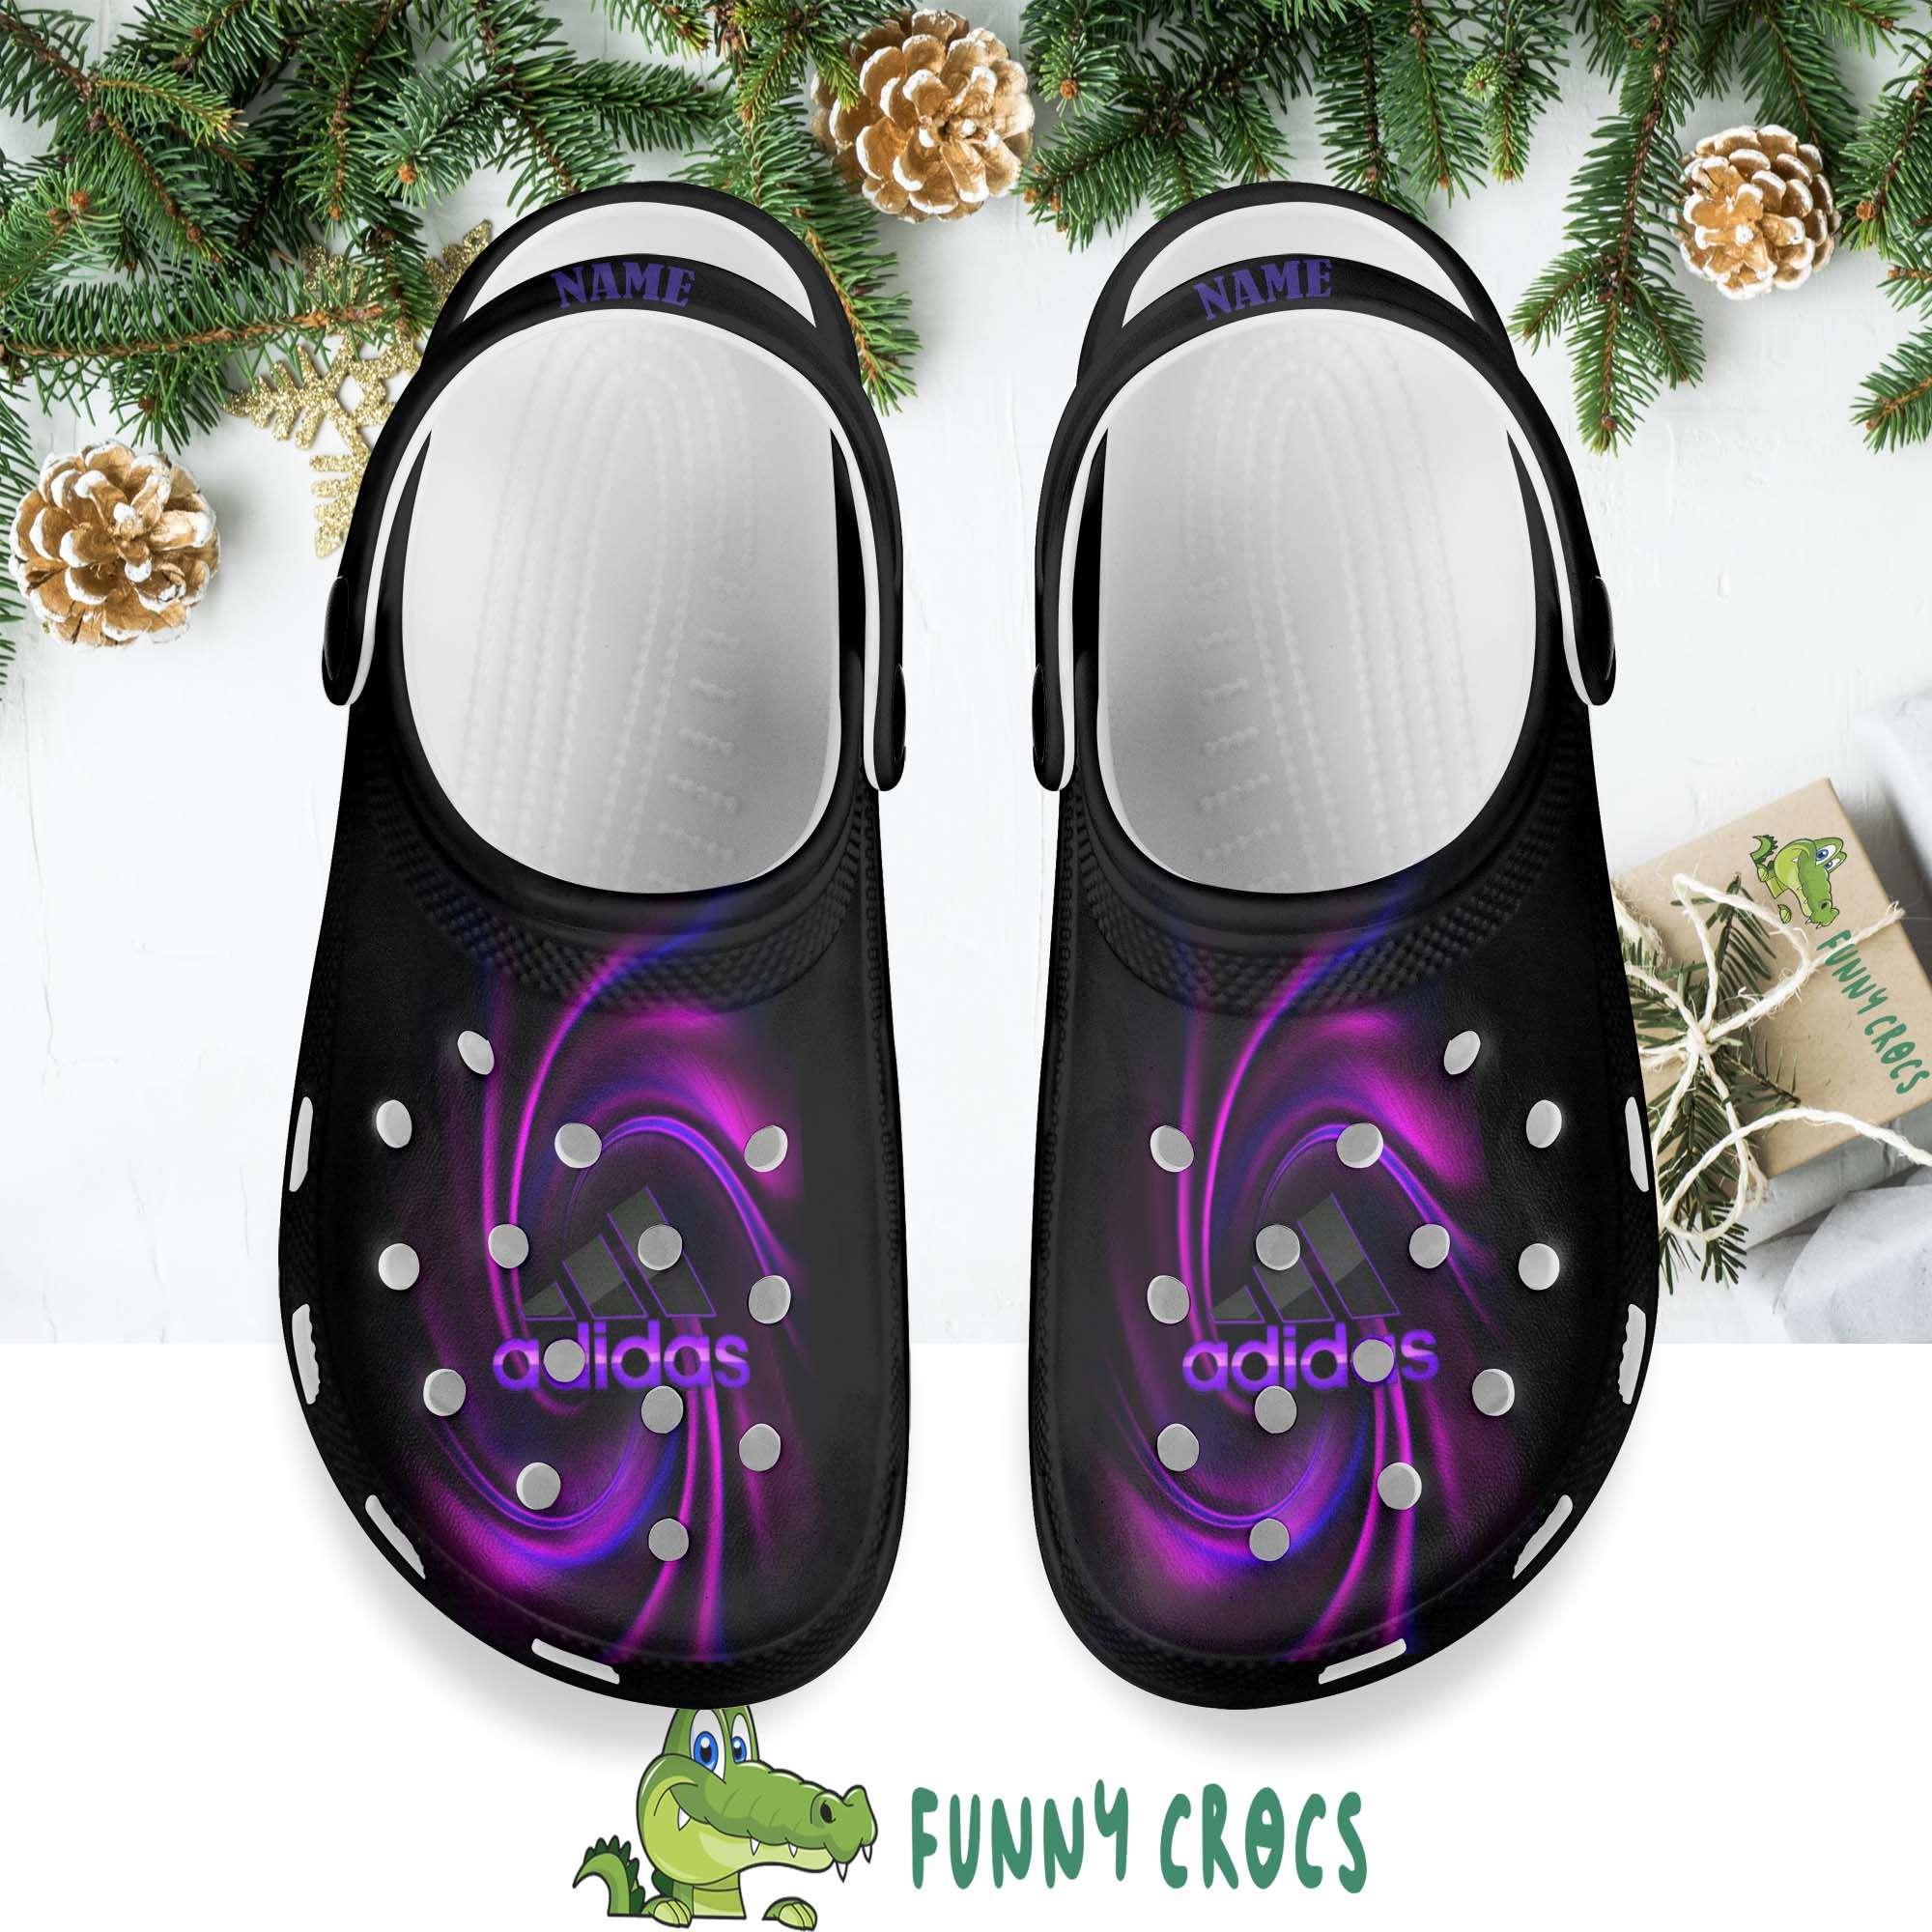 Purple Adidas Crocs Shoes - Discover Comfort And Style Clog Shoes With ...